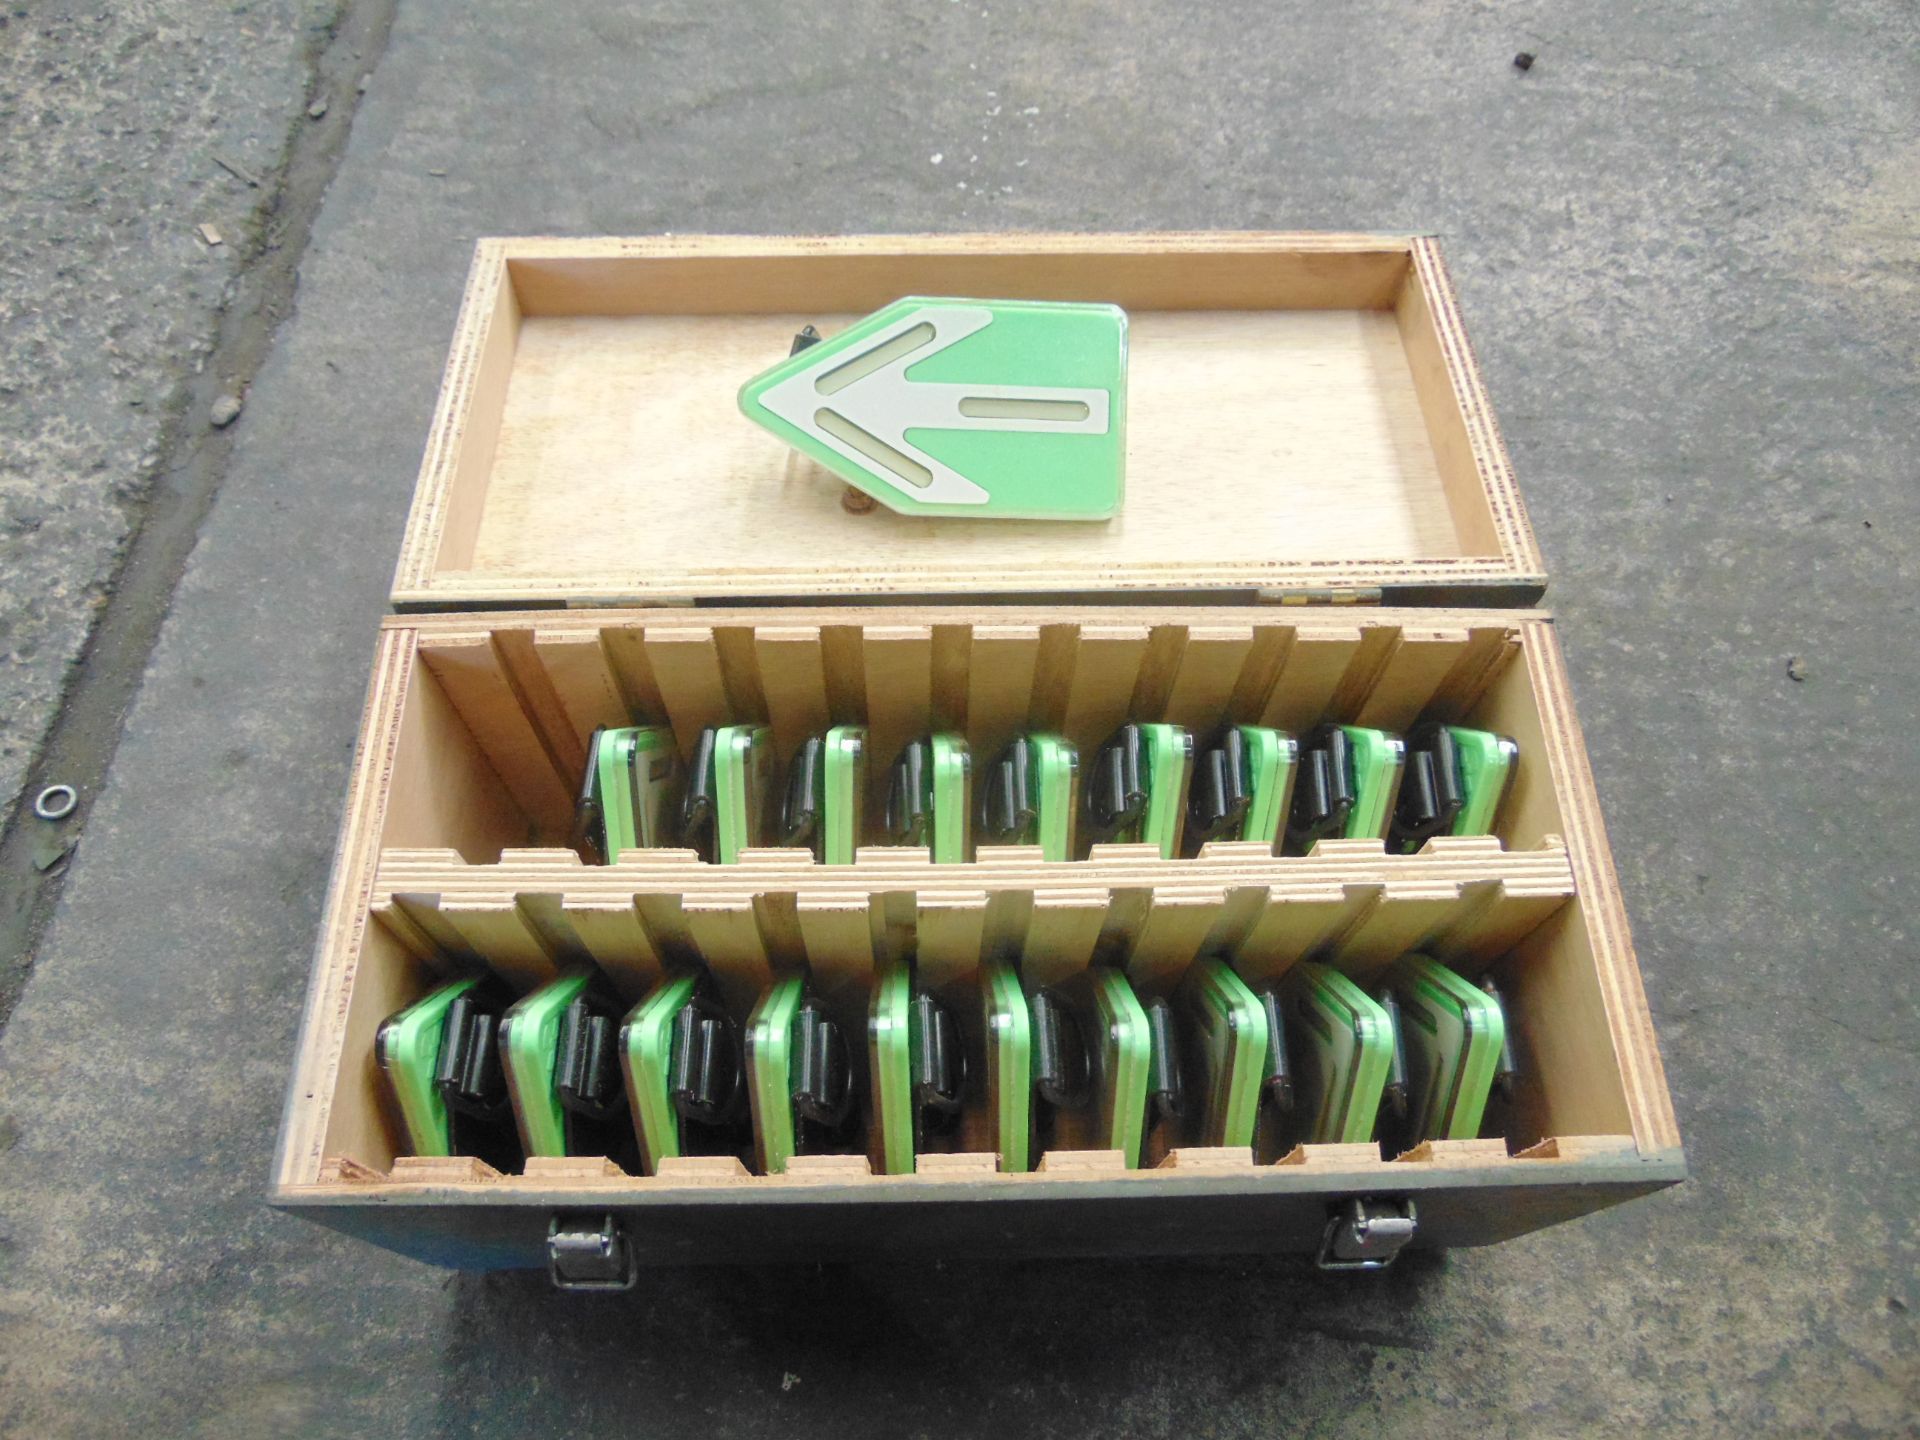 20 x Very Rare British Army Glow In The Dark Green Route Markers in Wooden Transit Case